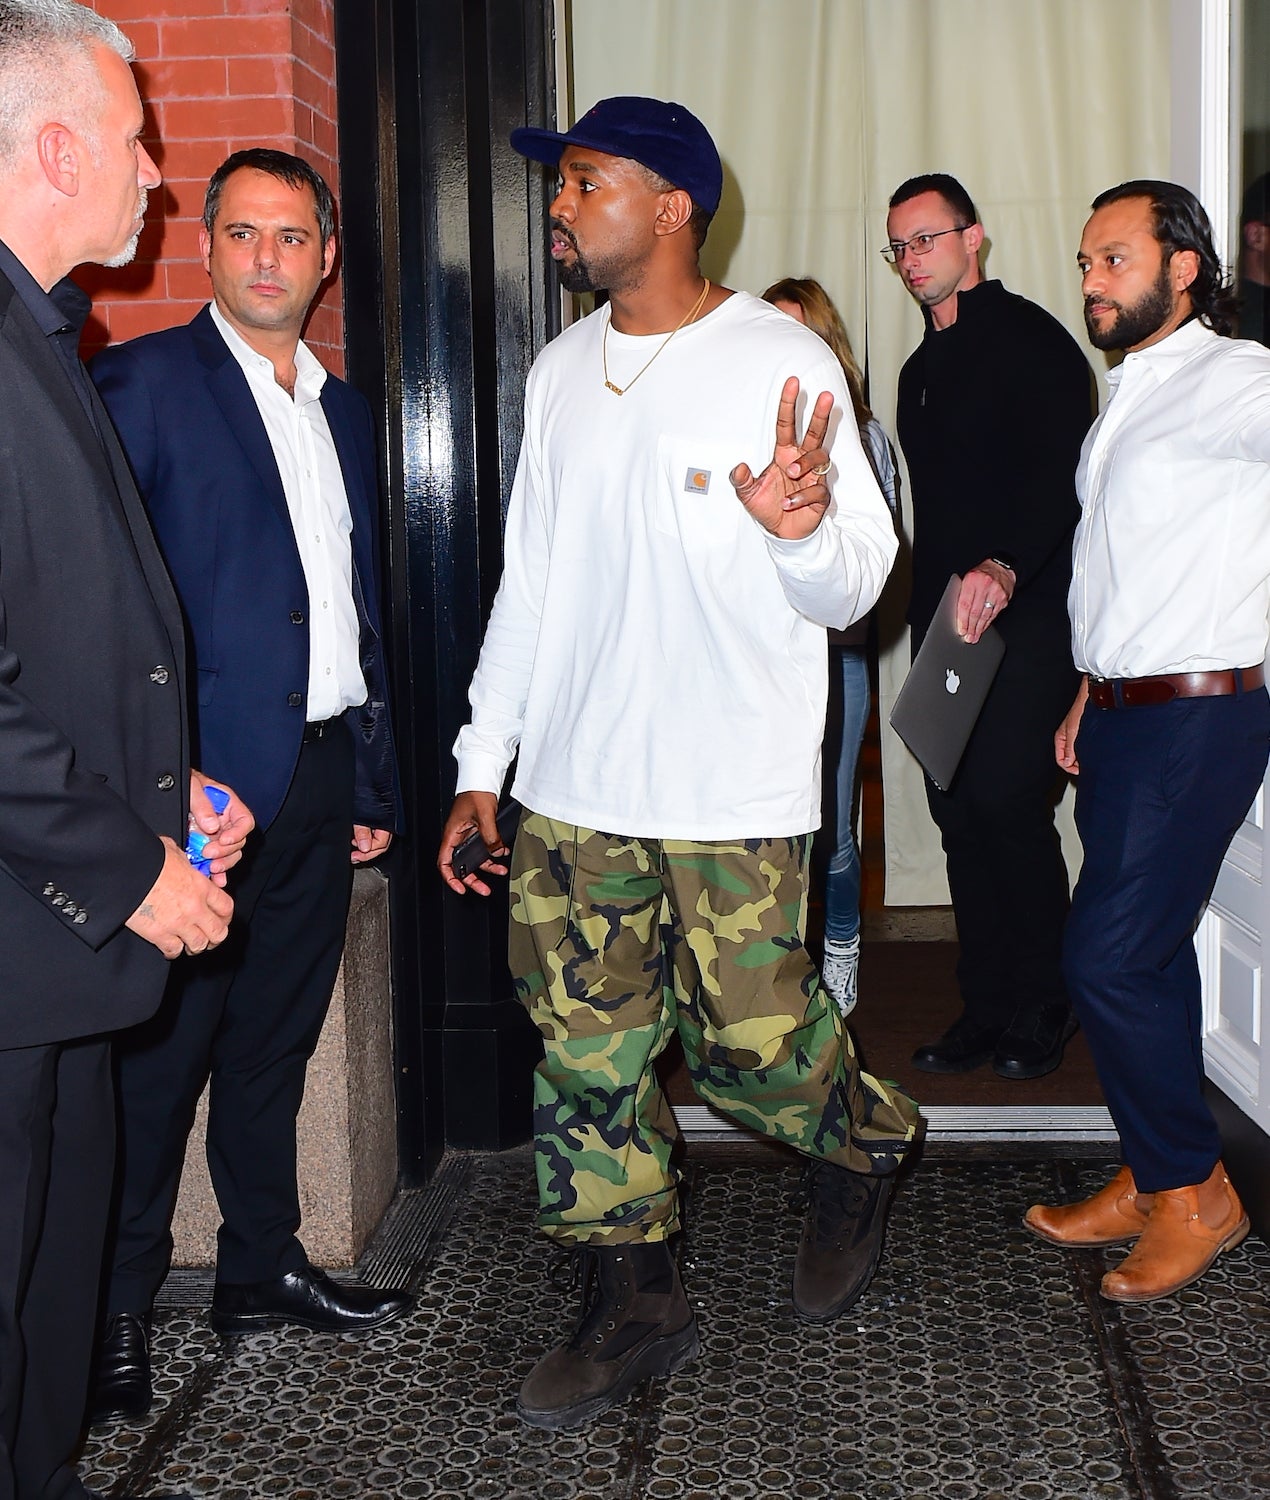 Kanye West 911 Call Released: 'I Think He’s Definitely Going To Need To Be Hospitalized'
